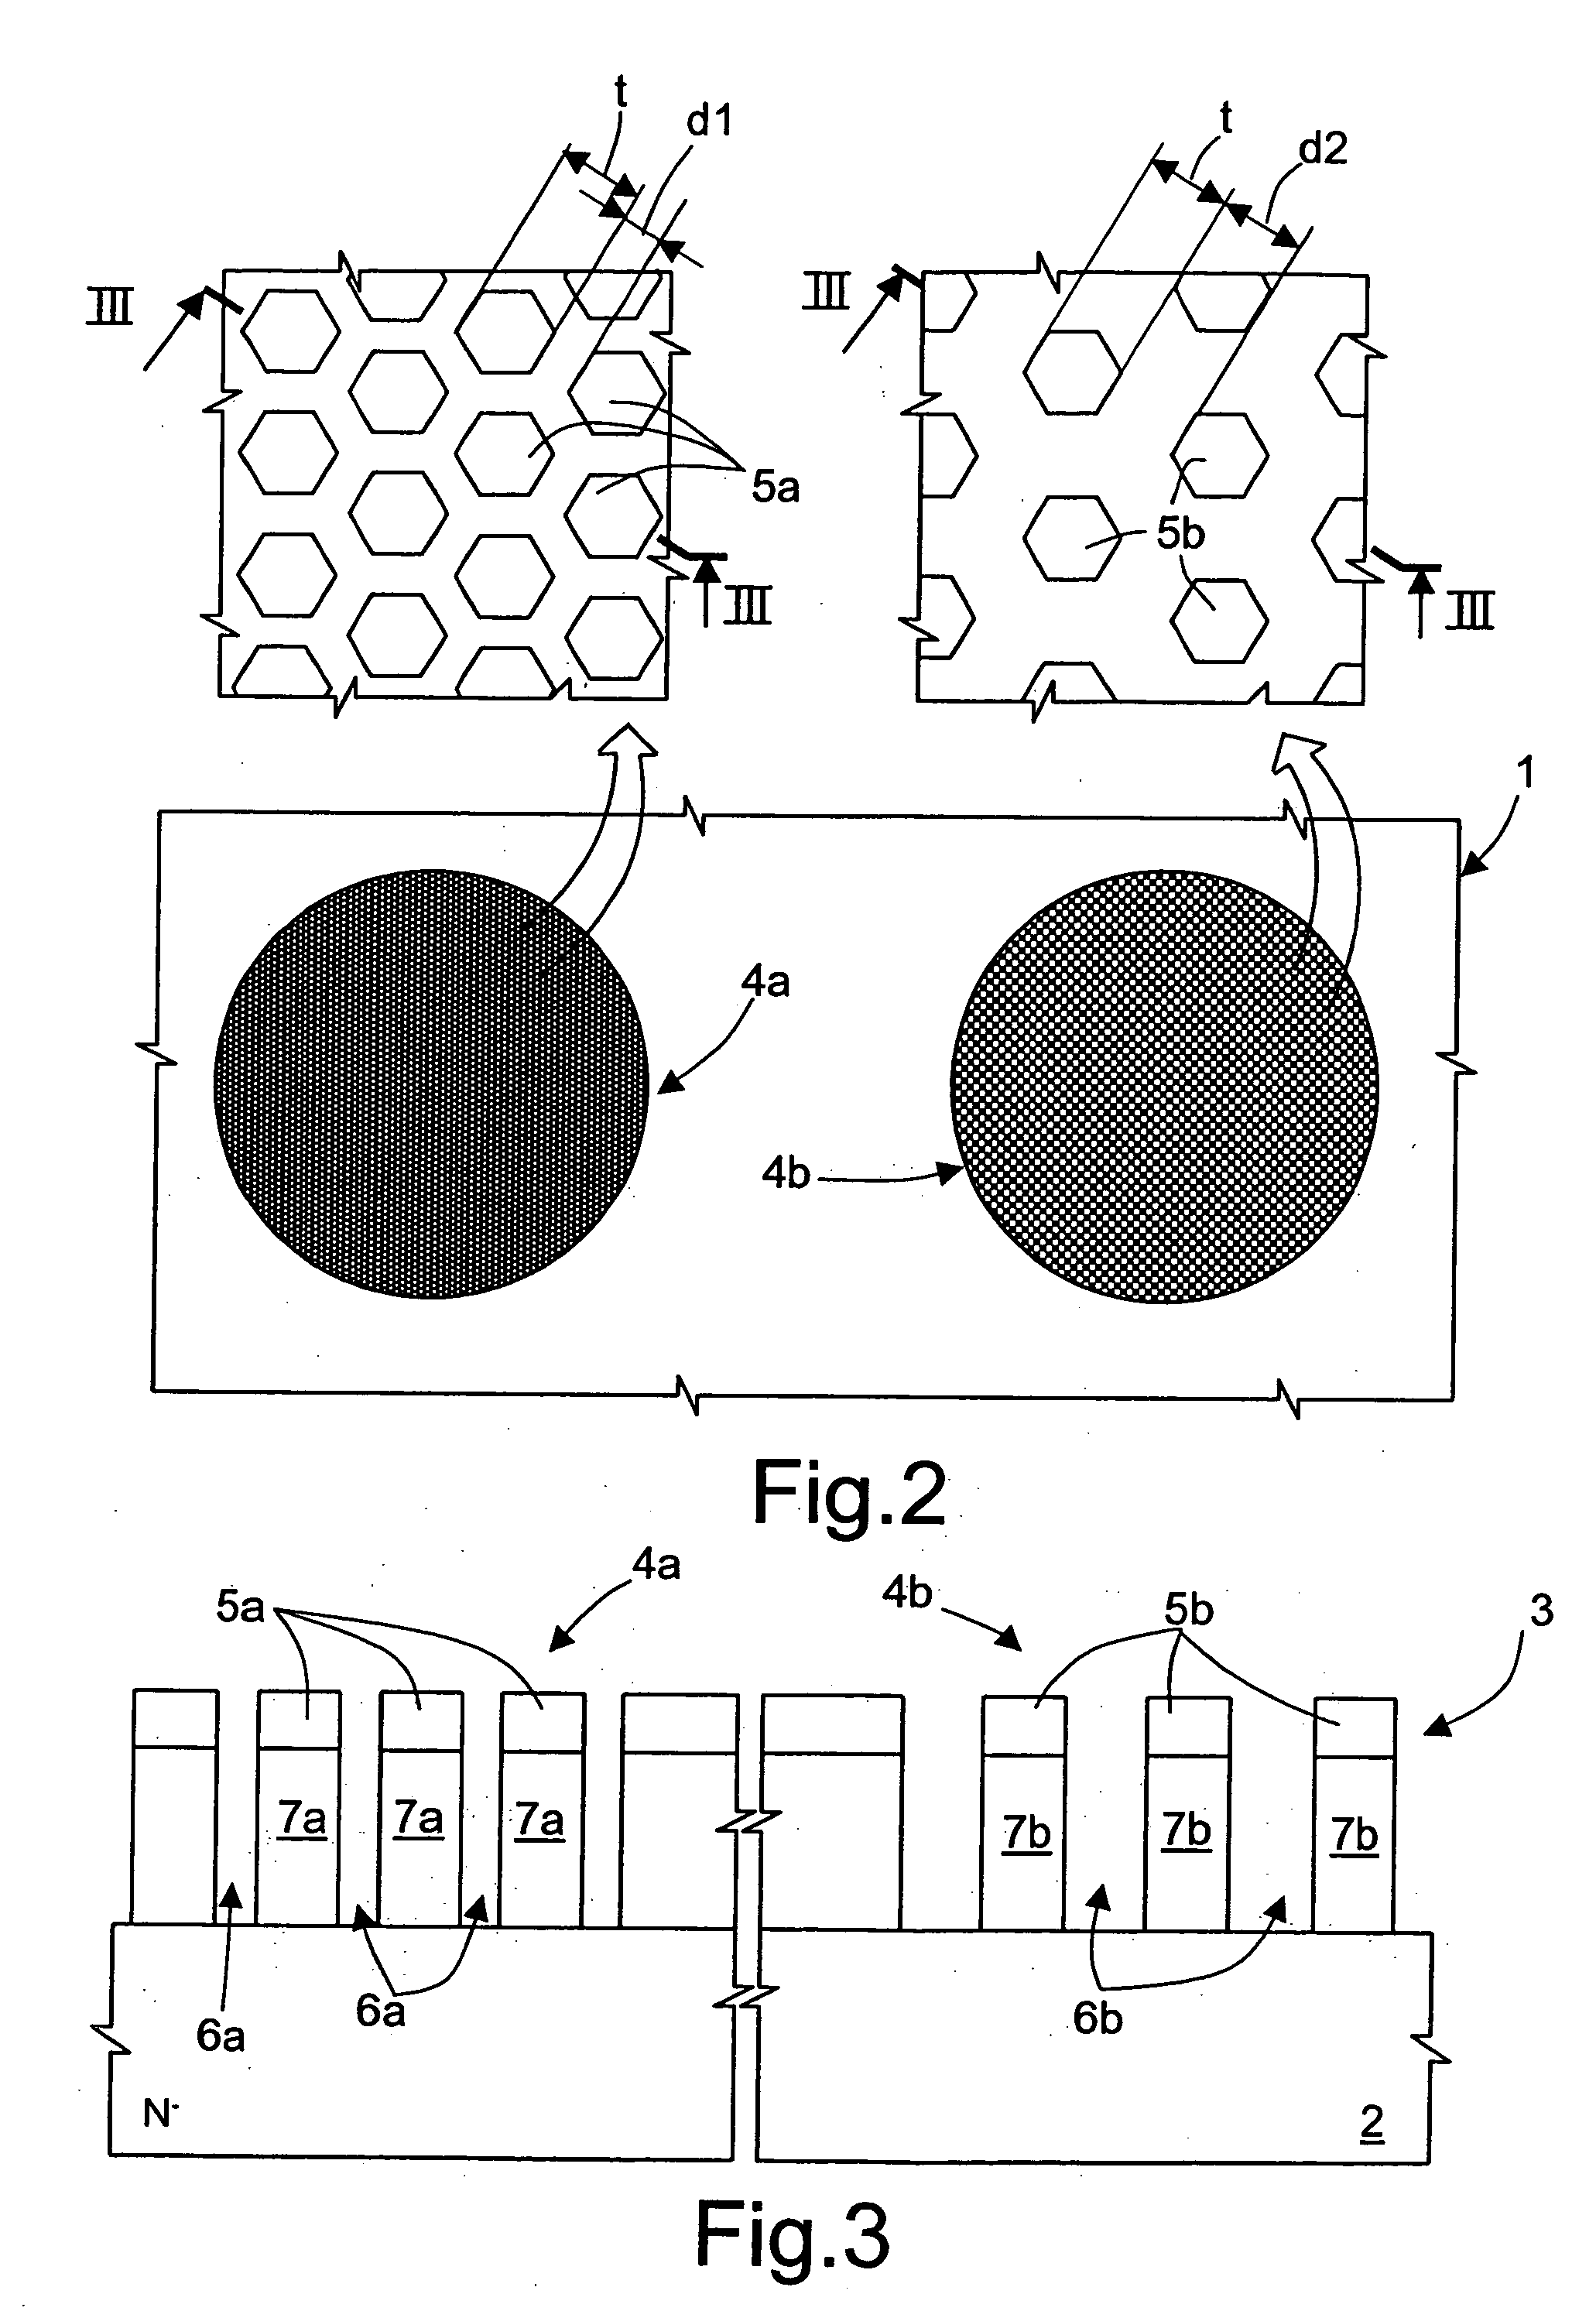 Method for manufacturing a semiconductor pressure sensor